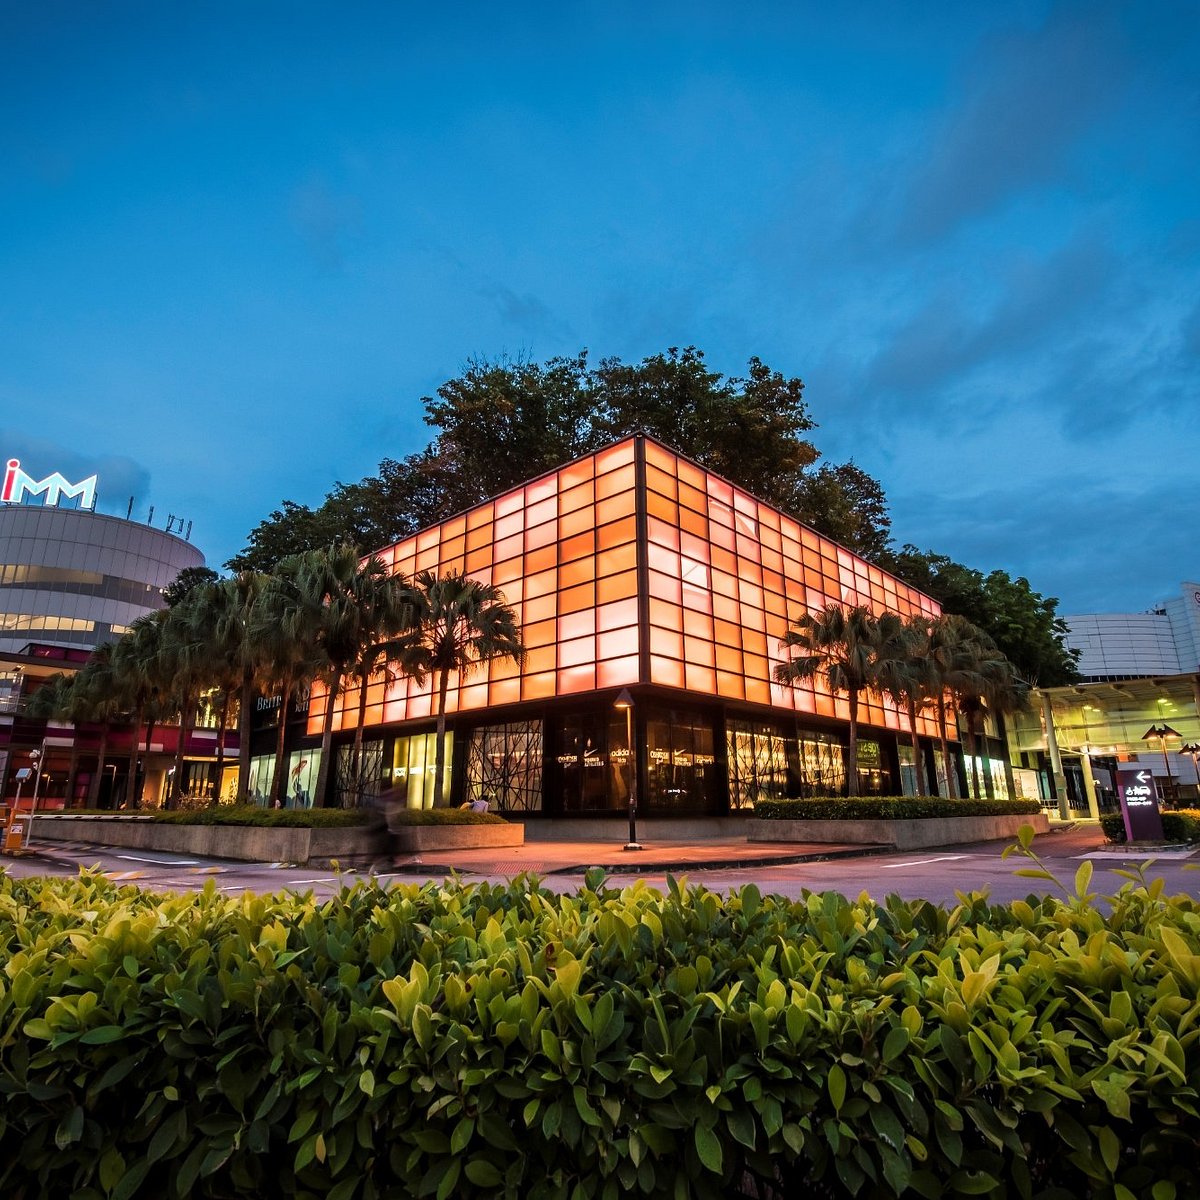 SINGAPORE-JUNE 17, 2018: Charles & Keith Store Outlet In Marina